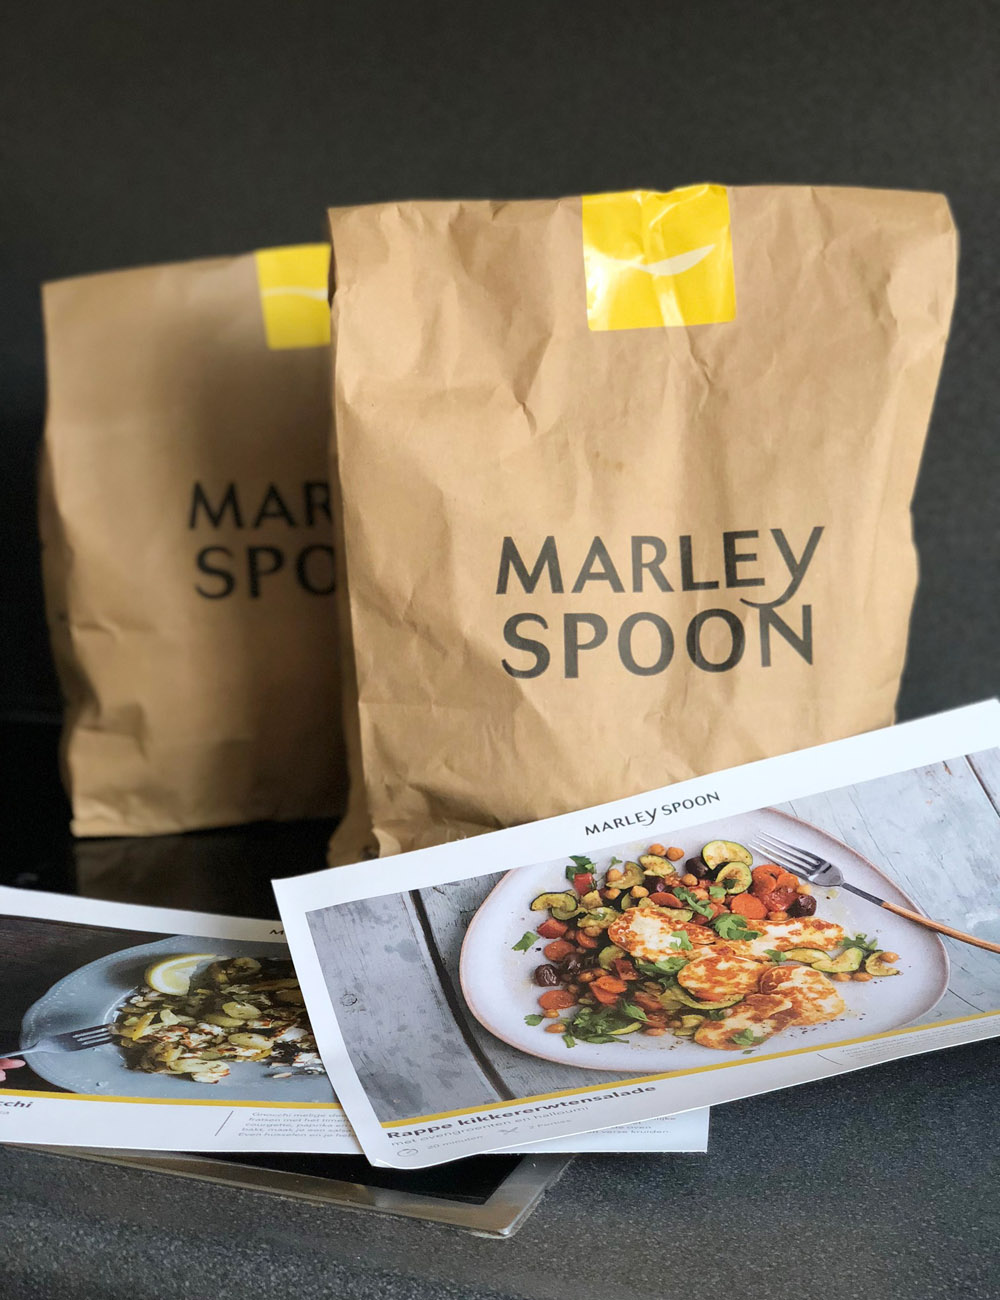 Marley spoon review